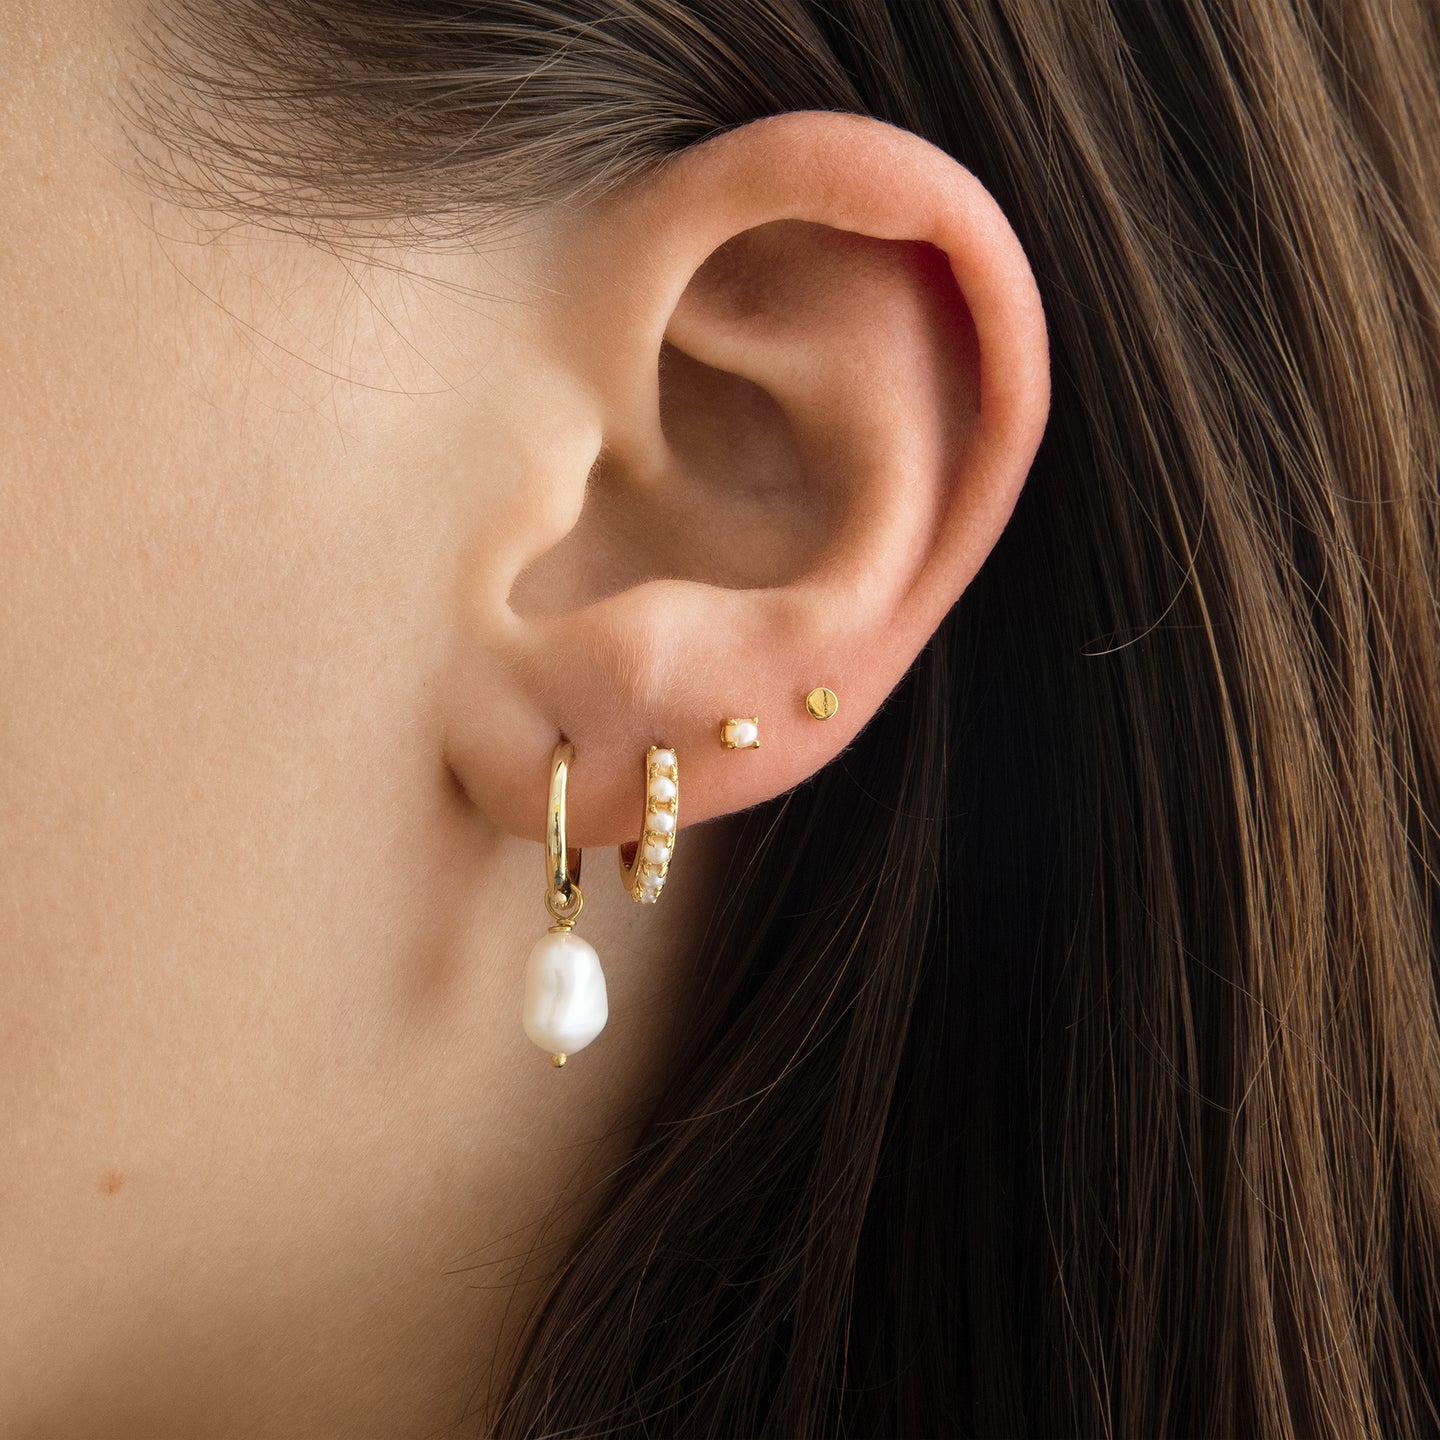 Studs Earrings Review - Must Read This Before Buying